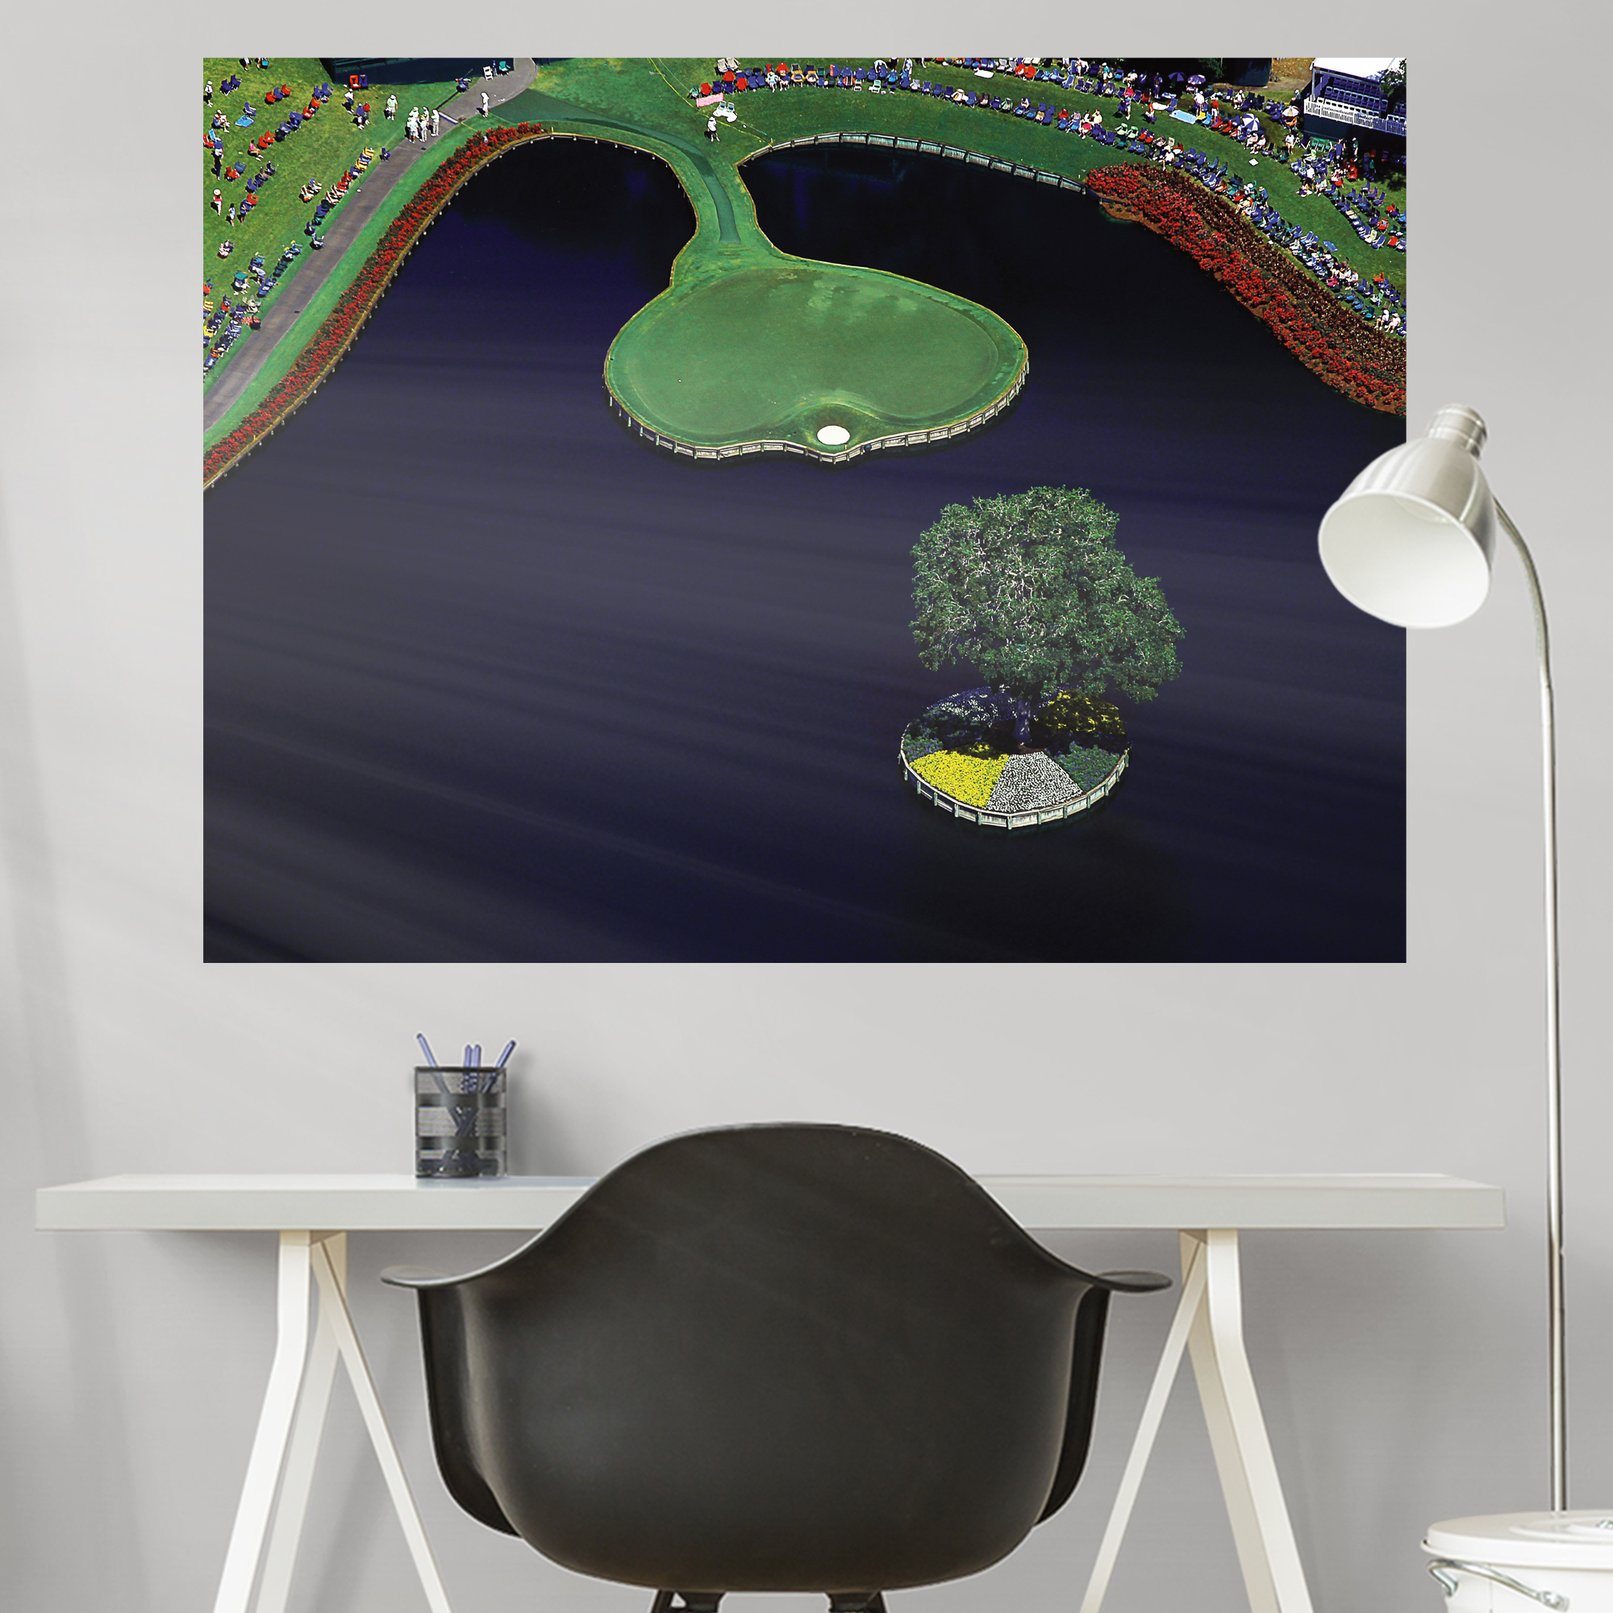 https://fathead.com/collections/golf/products/1025-00038